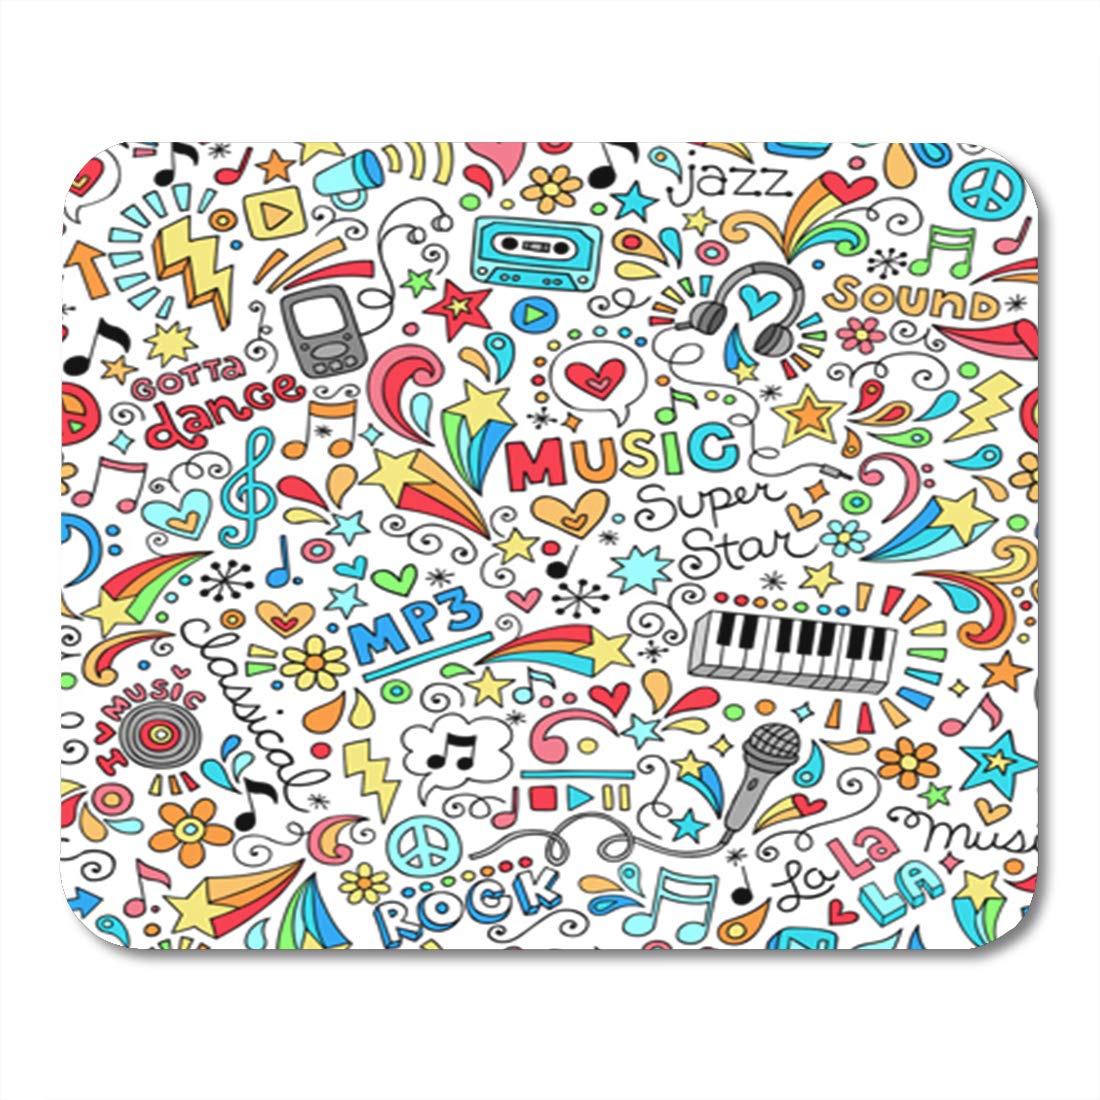 Groovy Music Doodle Mouse Pad 9.25